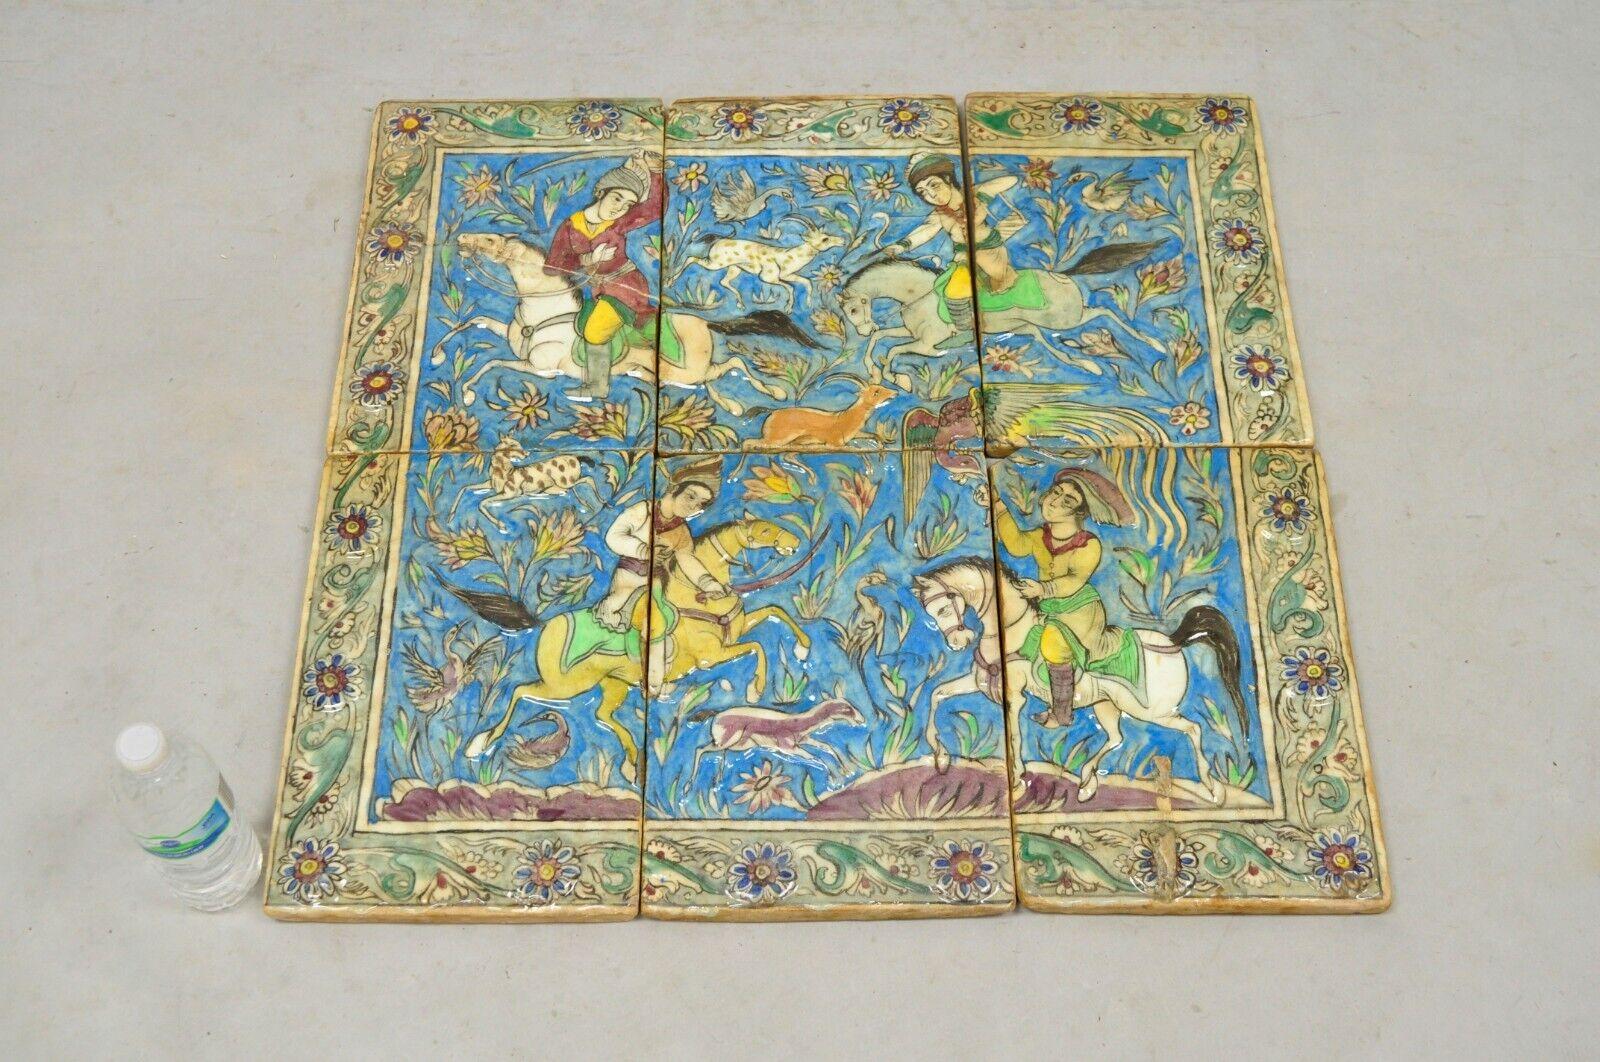 Antique Persian Iznik Qajar style Ceramic pottery Tile Mosaic Hunt Scene 6 Pc Set (C7). Scene consists of 4 horseback riders with various animals and birds. Item features an original crackle glazed finish, heavy ceramic pottery construction, very